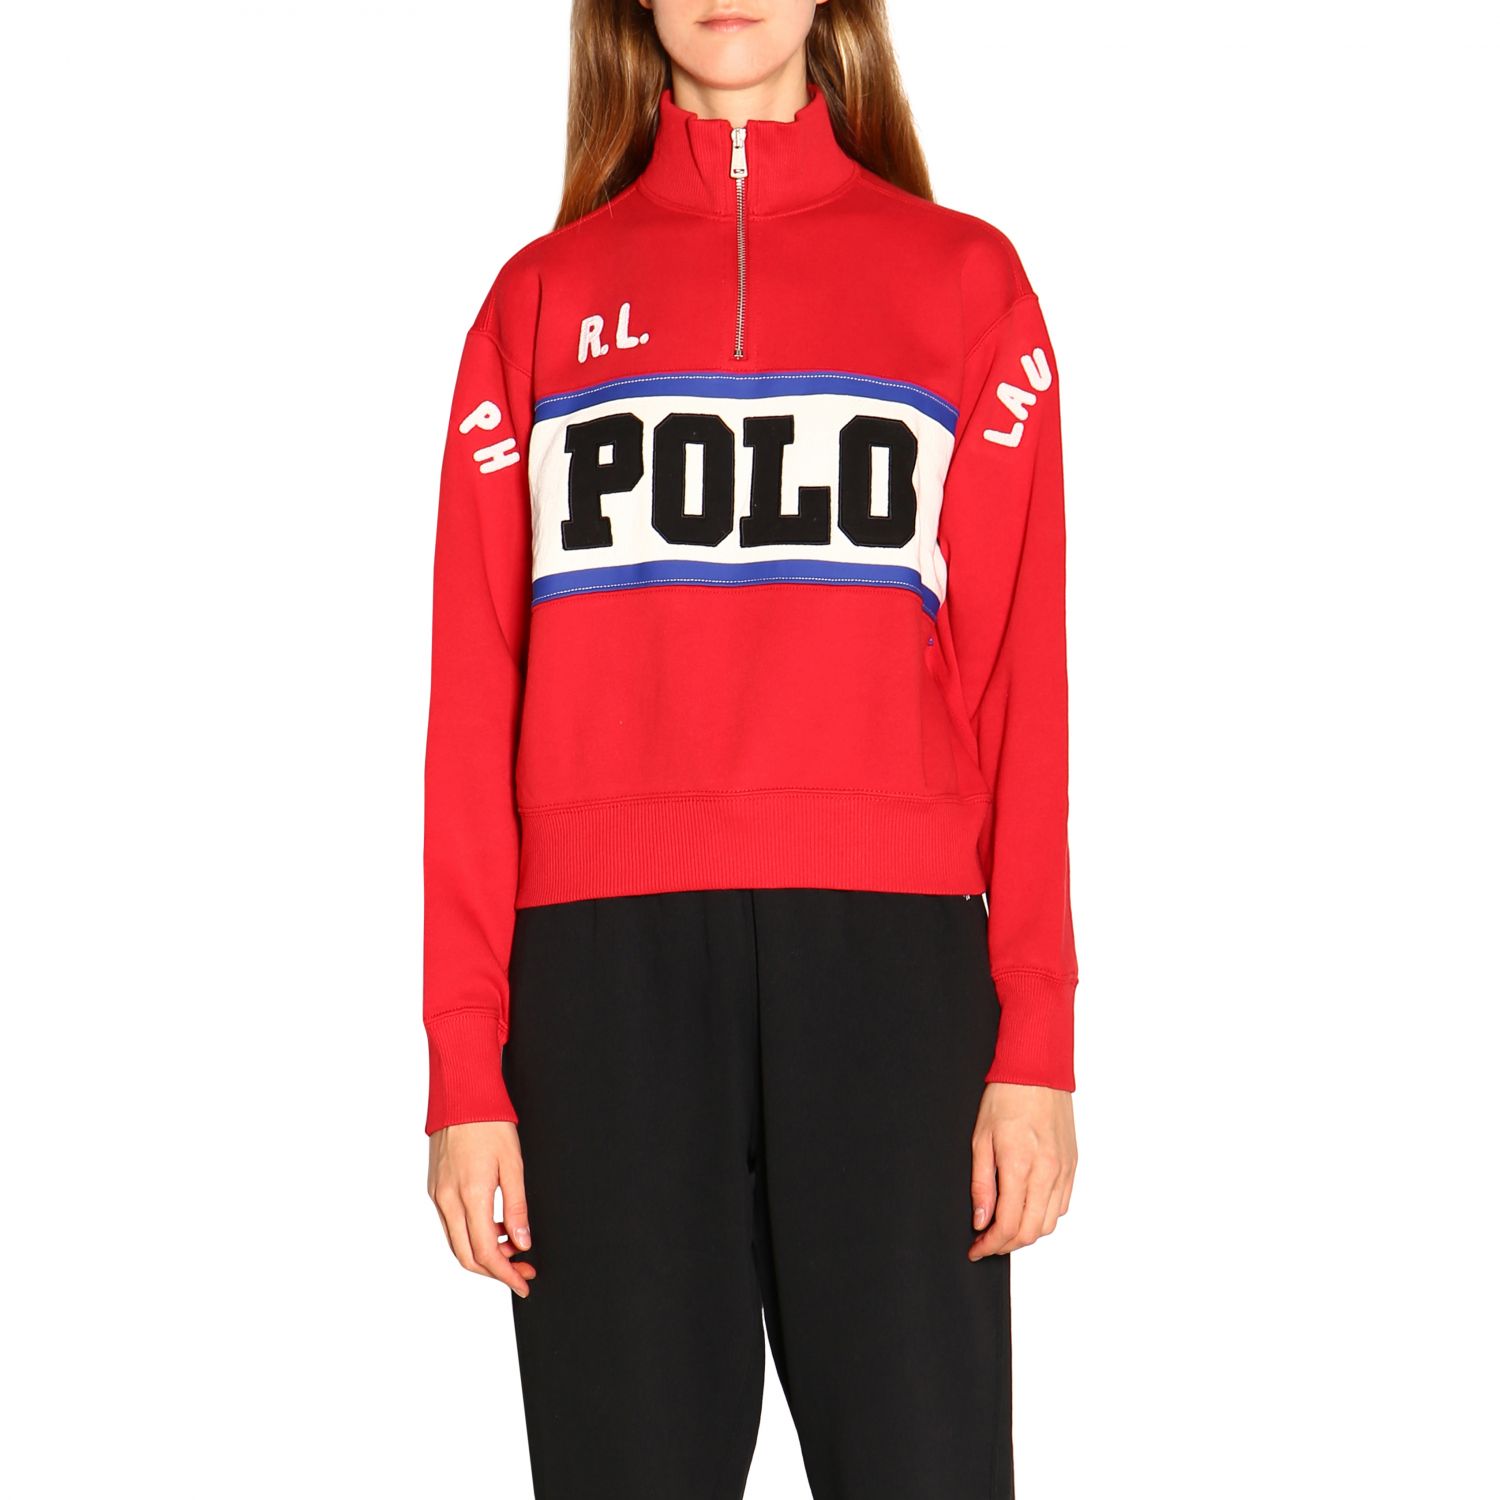 red polo hoodie women's